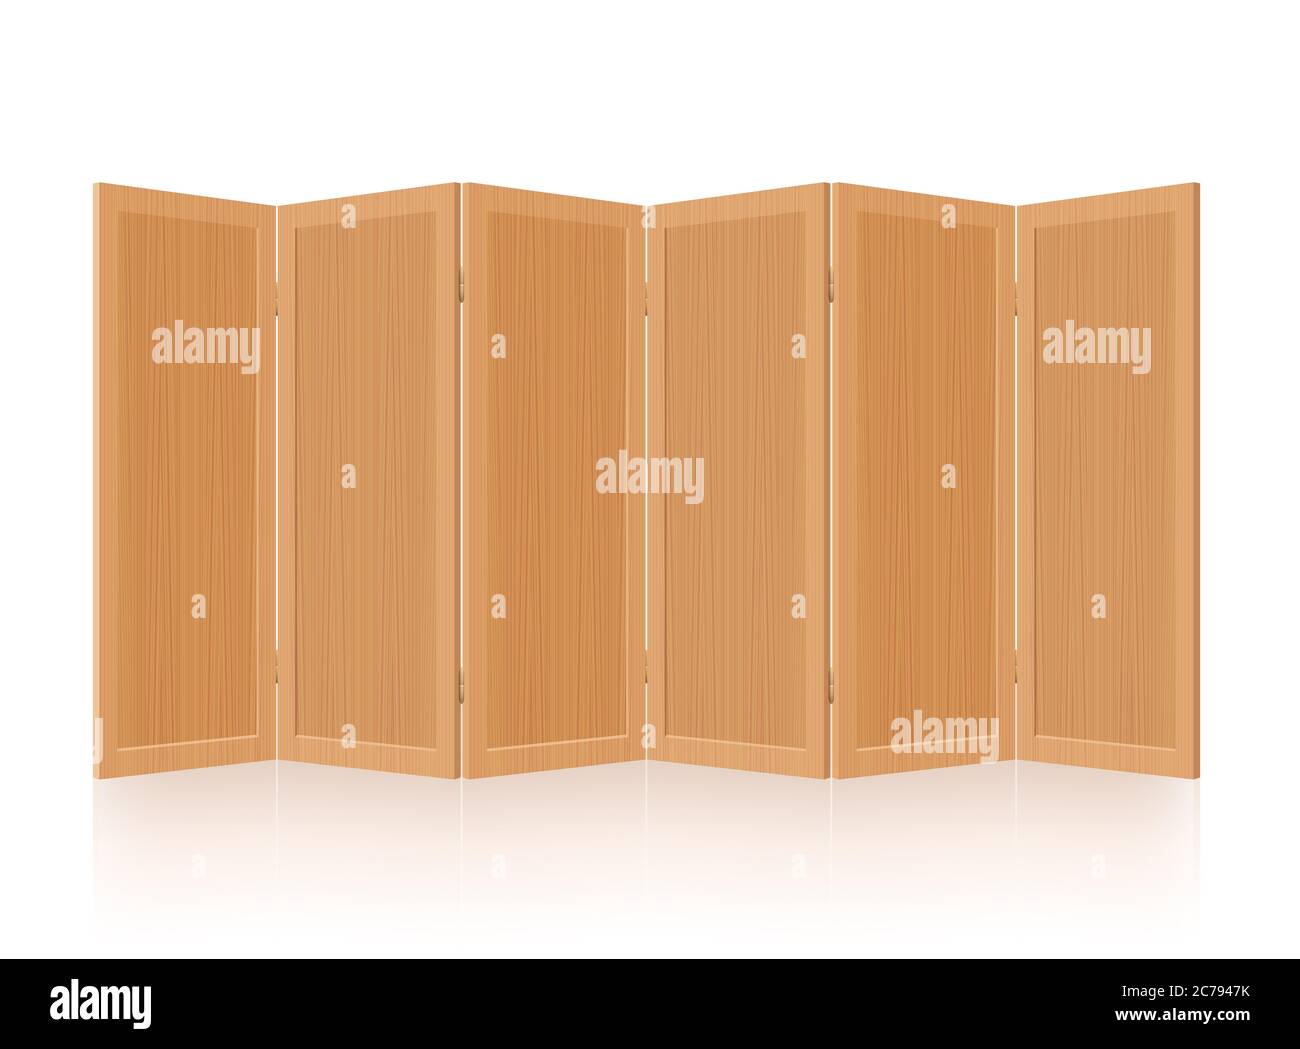 Partition, room divider, folding screen - wooden, foldable, mobile, rustic, retro interior furniture - illustration on white background. Stock Photo